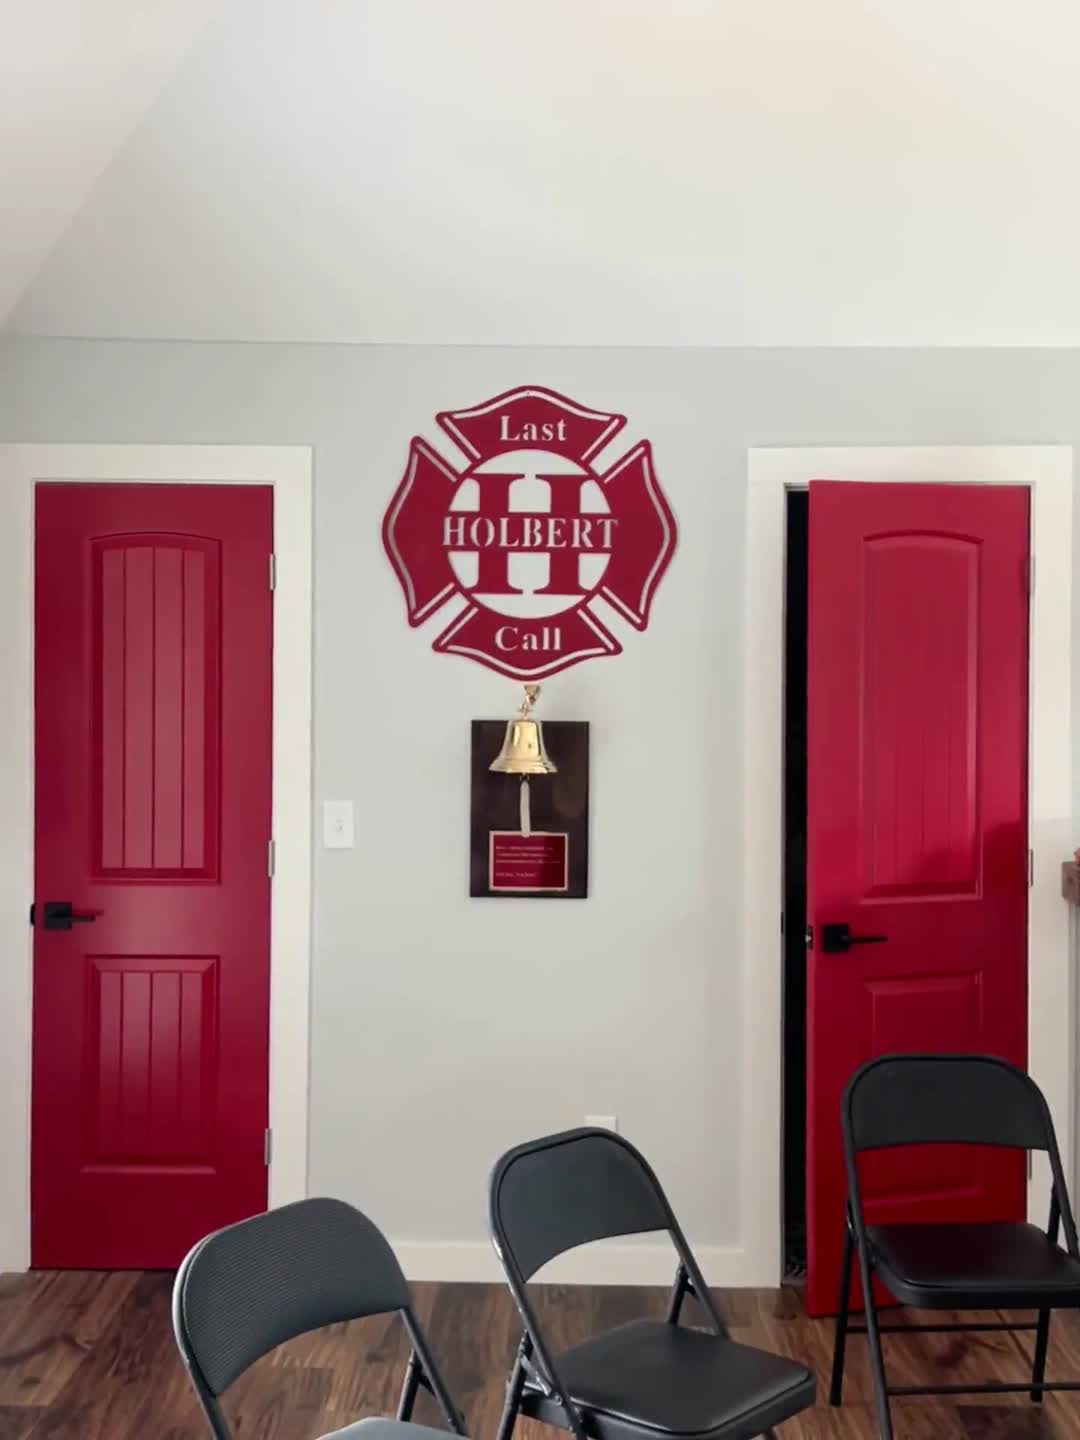 A room with red chairs and a firefighter logo on the wall, created by a Custom Home Builder.